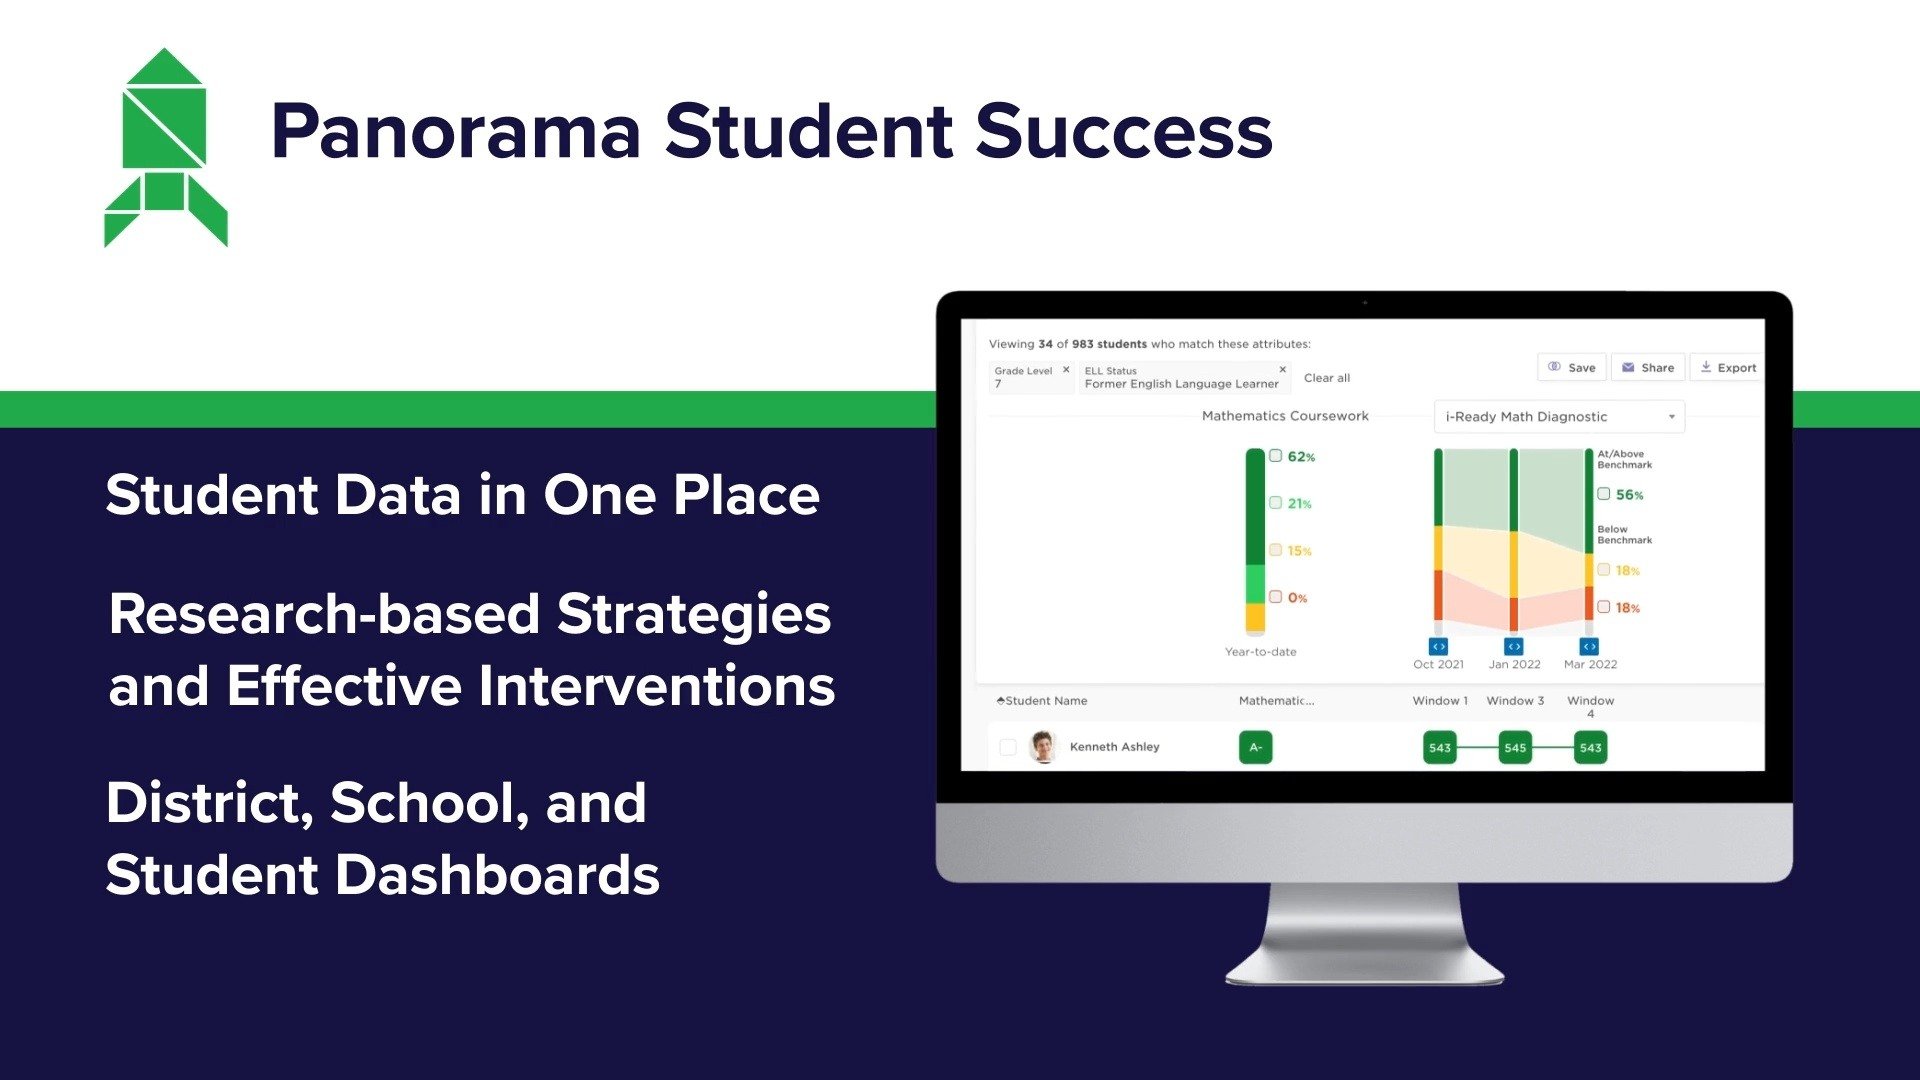 Introduction to Panorama Student Success